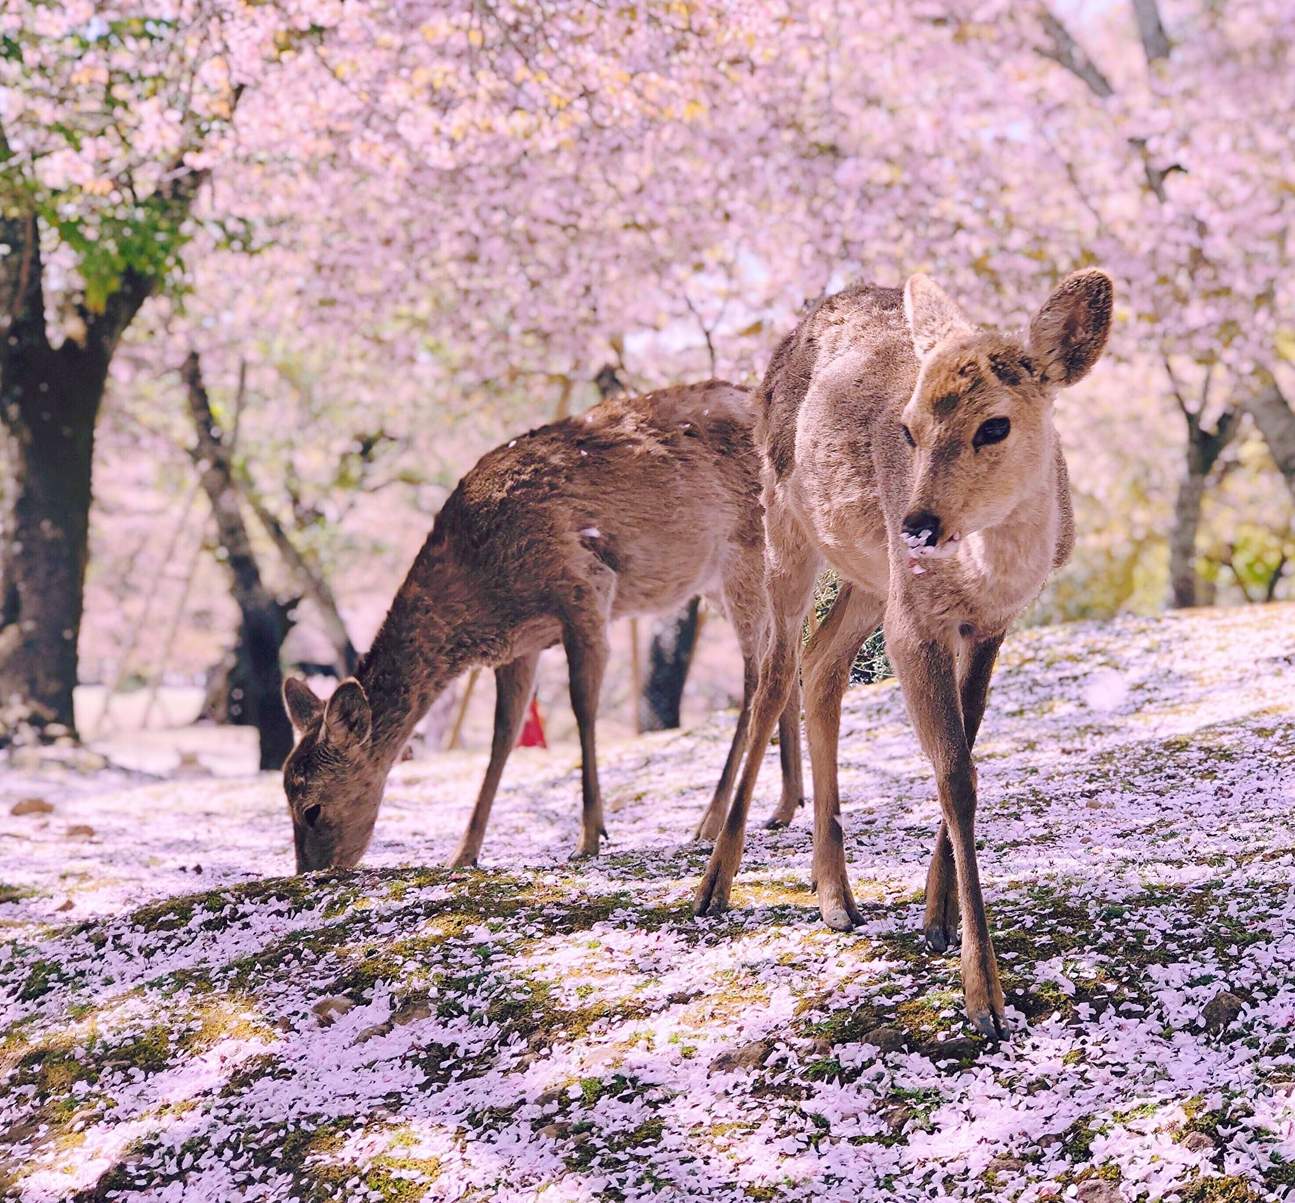 Nara park, Todaiji Temple, and Mt. Yoshino One Day Bus Tour with Cherry Blossom Viewing from Osaka - Klook